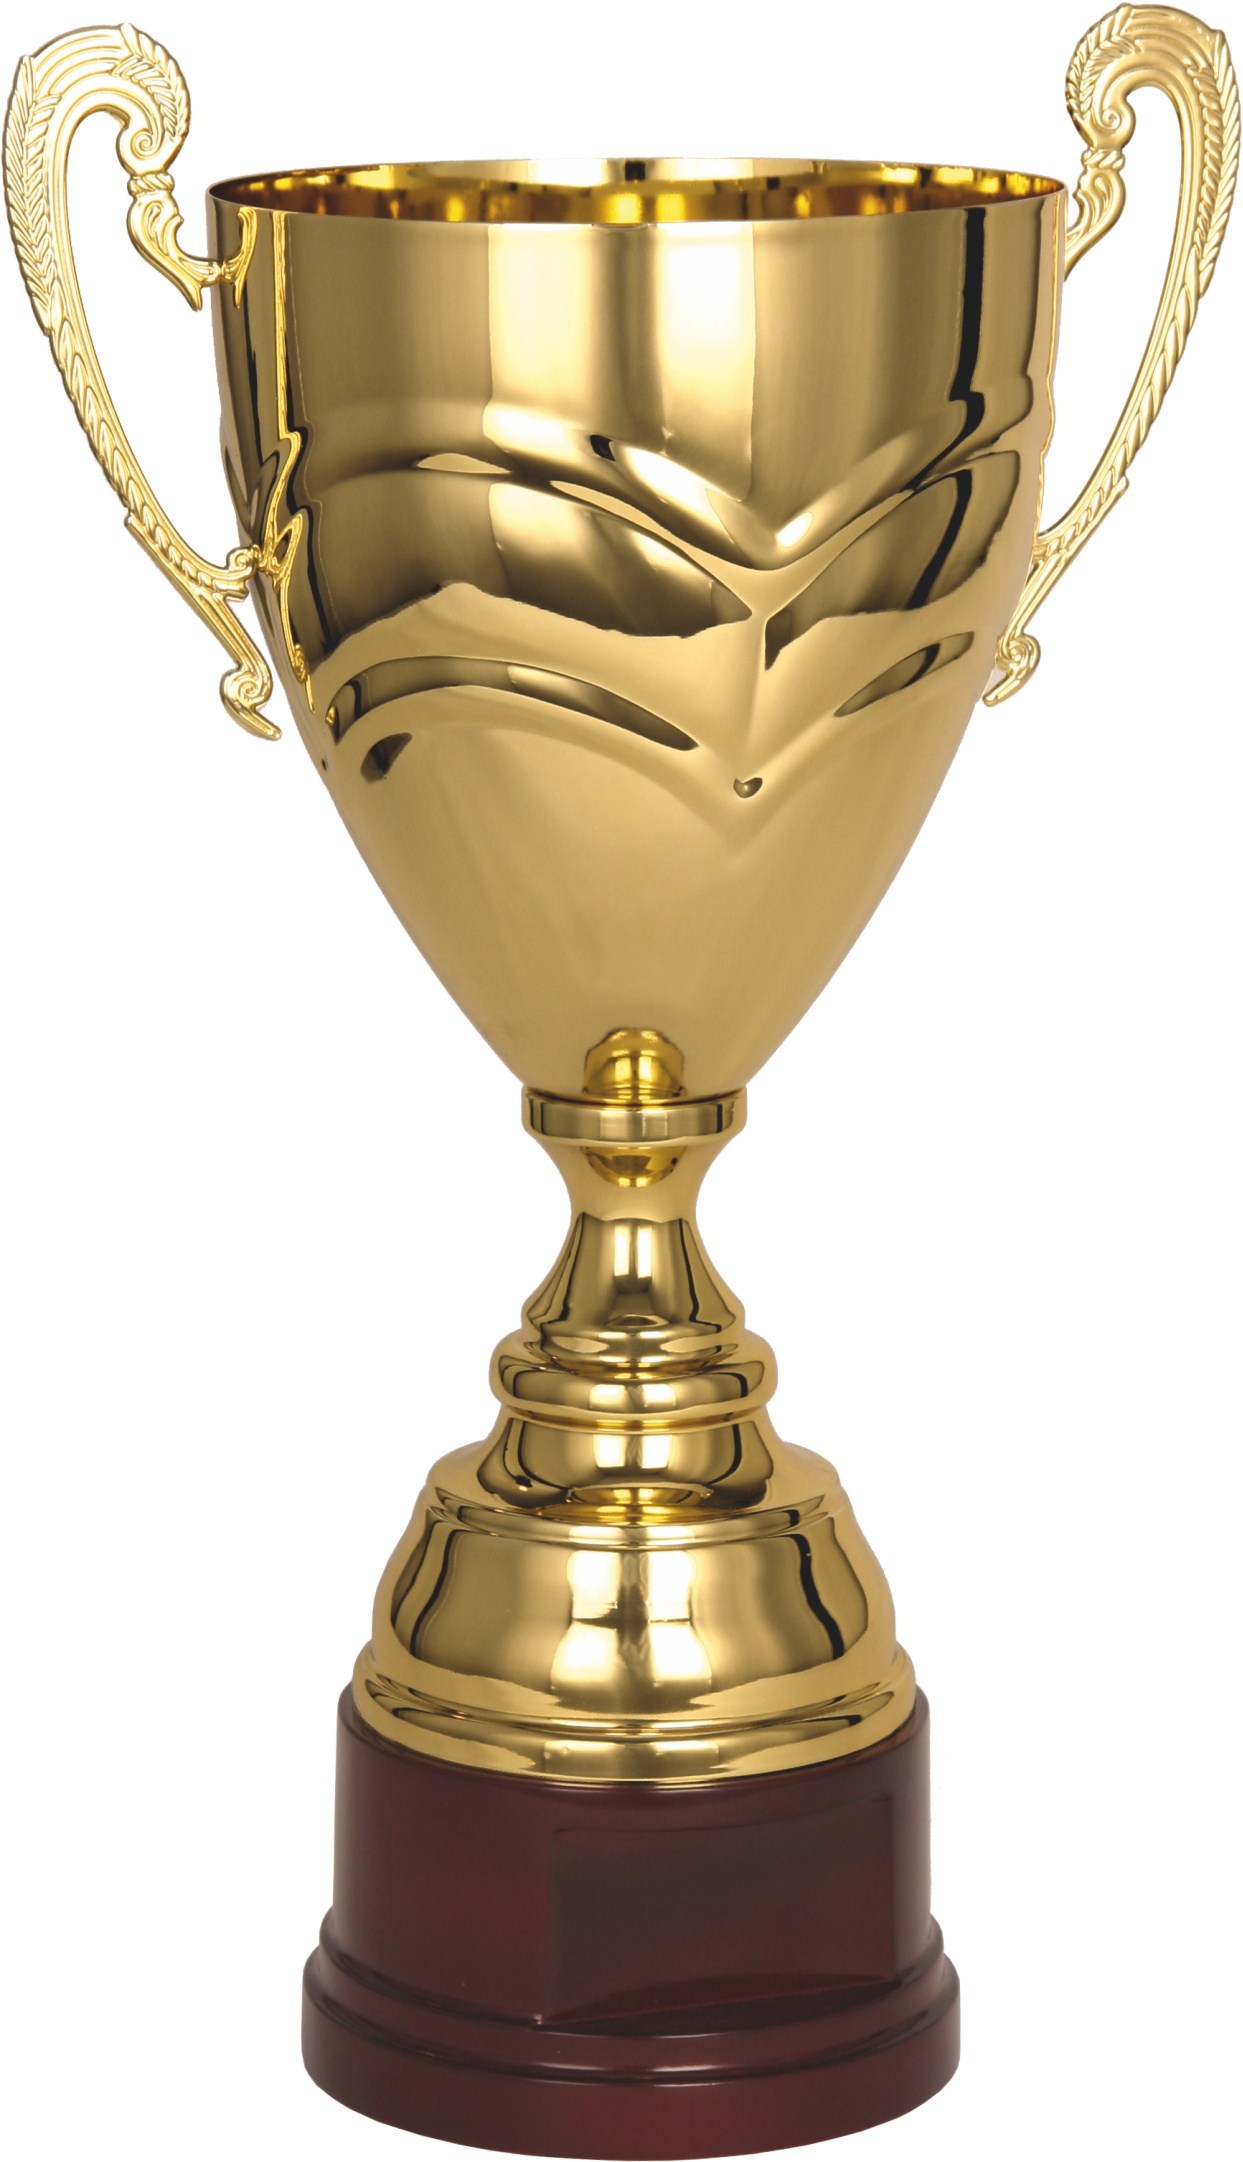 Golden Photos Cup HQ Image Free PNG Image